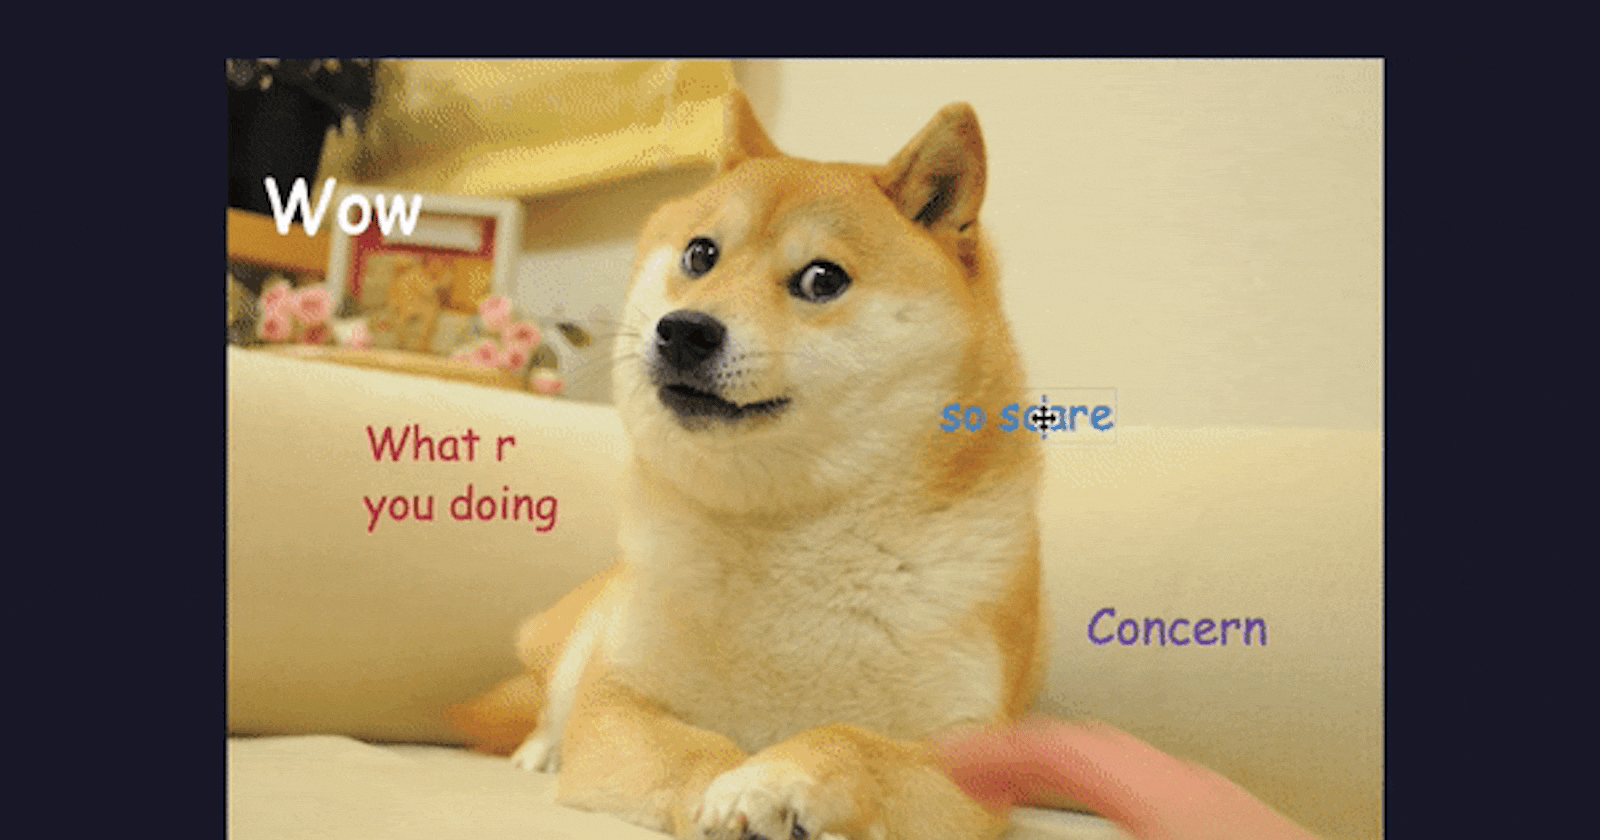 How to build a meme generator with JavaScript and Fabric.js